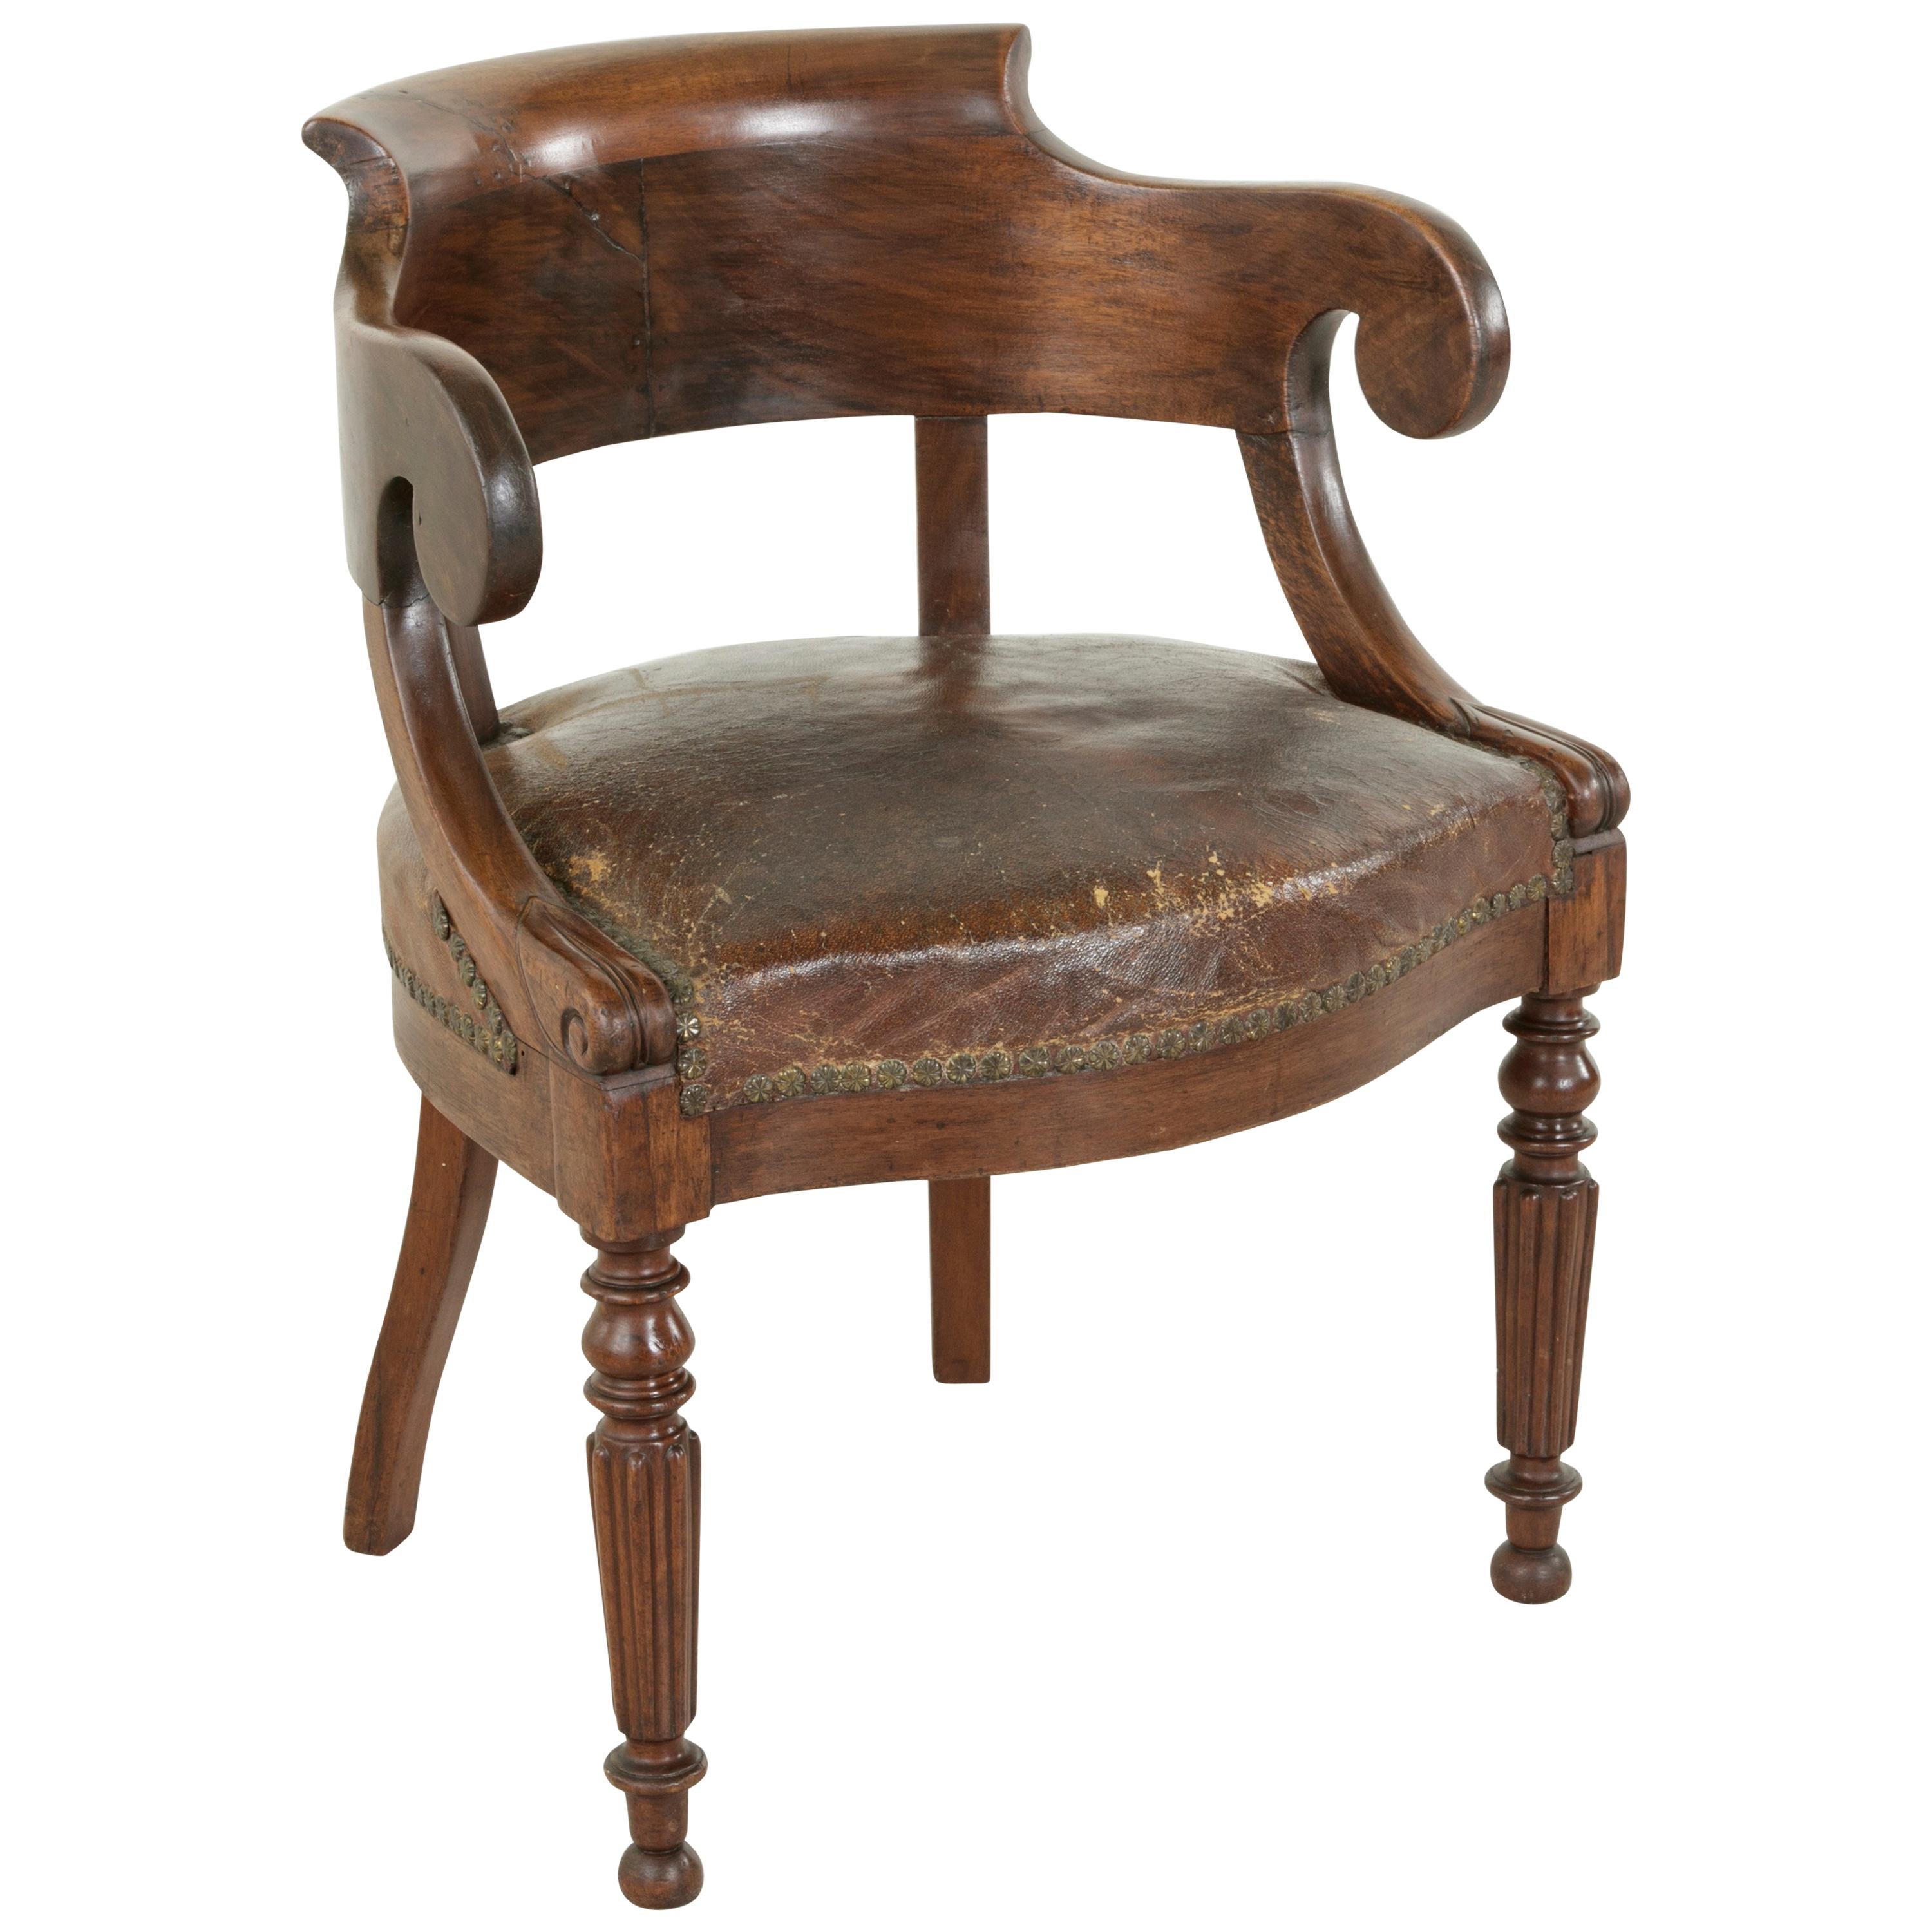 Late 19th Century French Walnut Armchair or Desk Chair with Leather Seat